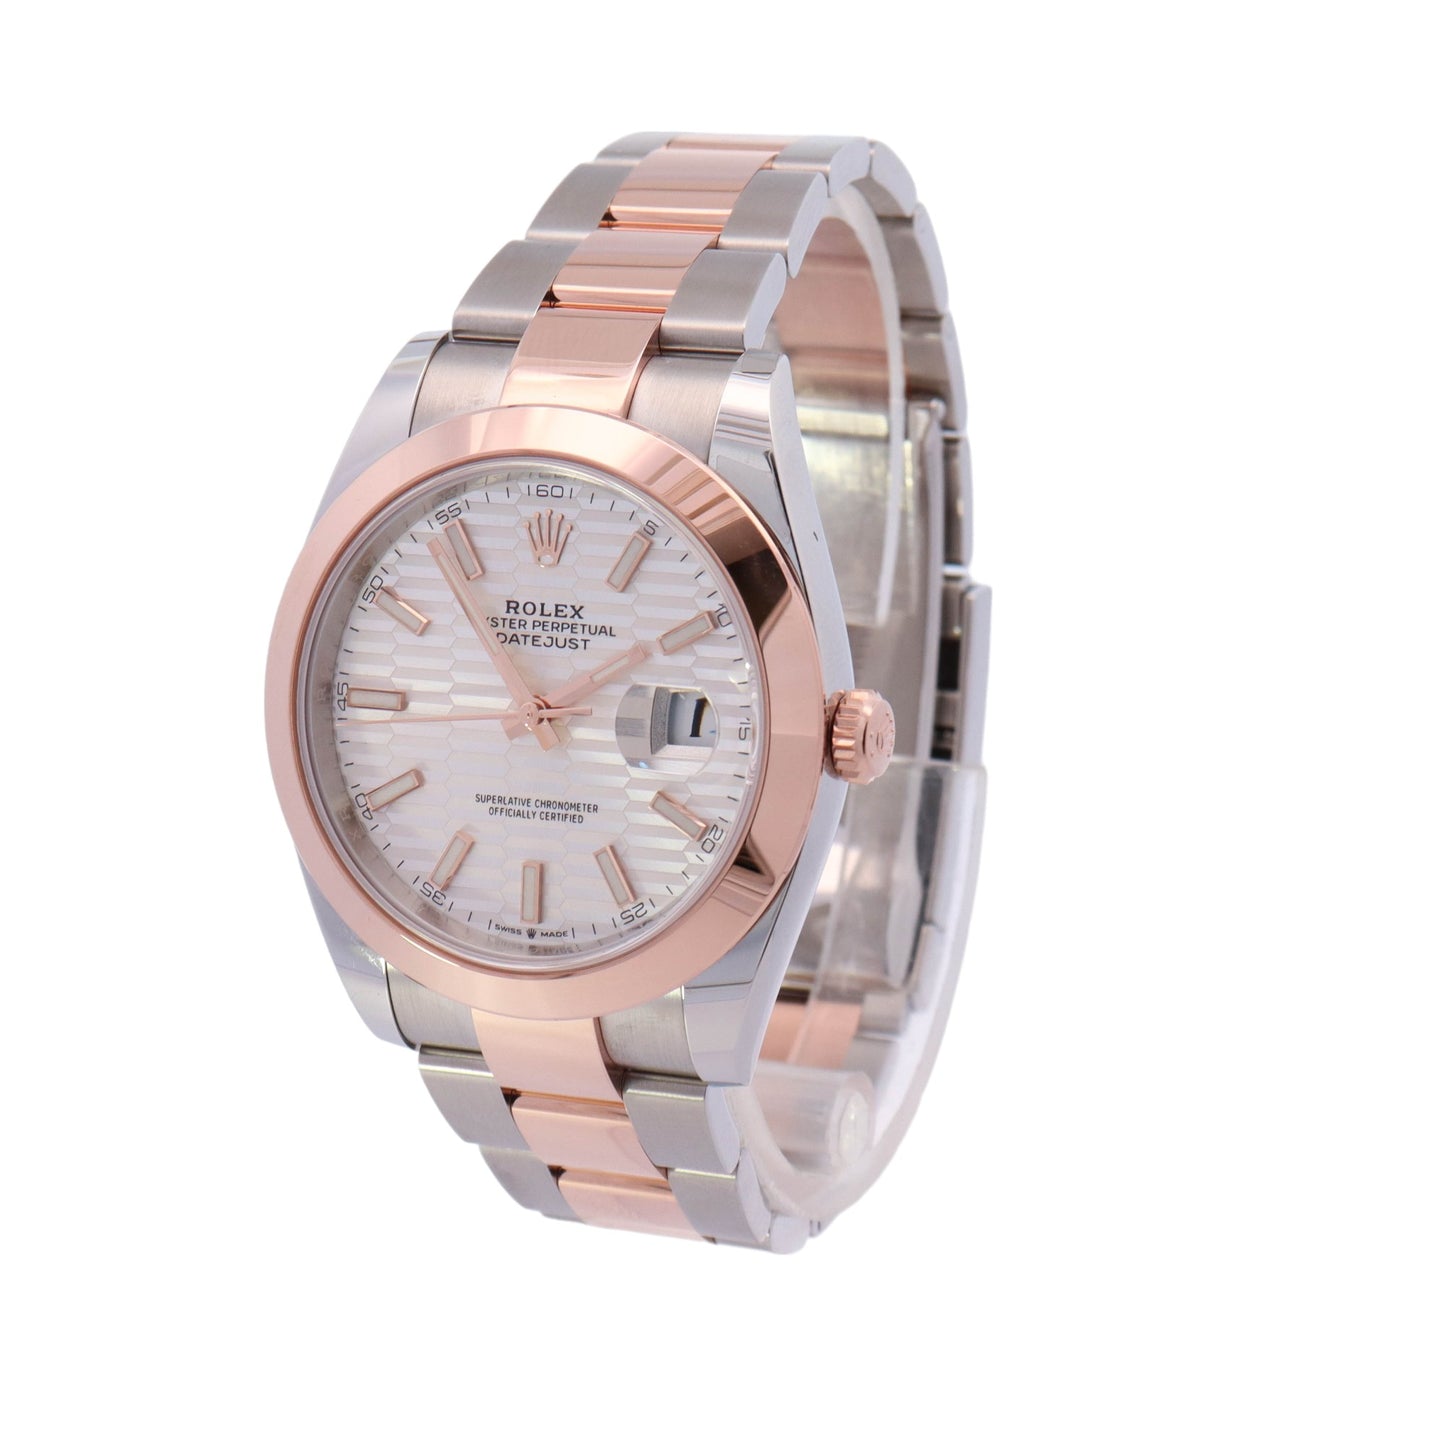 Rolex Datejust Two-Tone Stainless Steel & Rose Gold 41mm Silver Motif Dial Watch Reference# 126301 - Happy Jewelers Fine Jewelry Lifetime Warranty